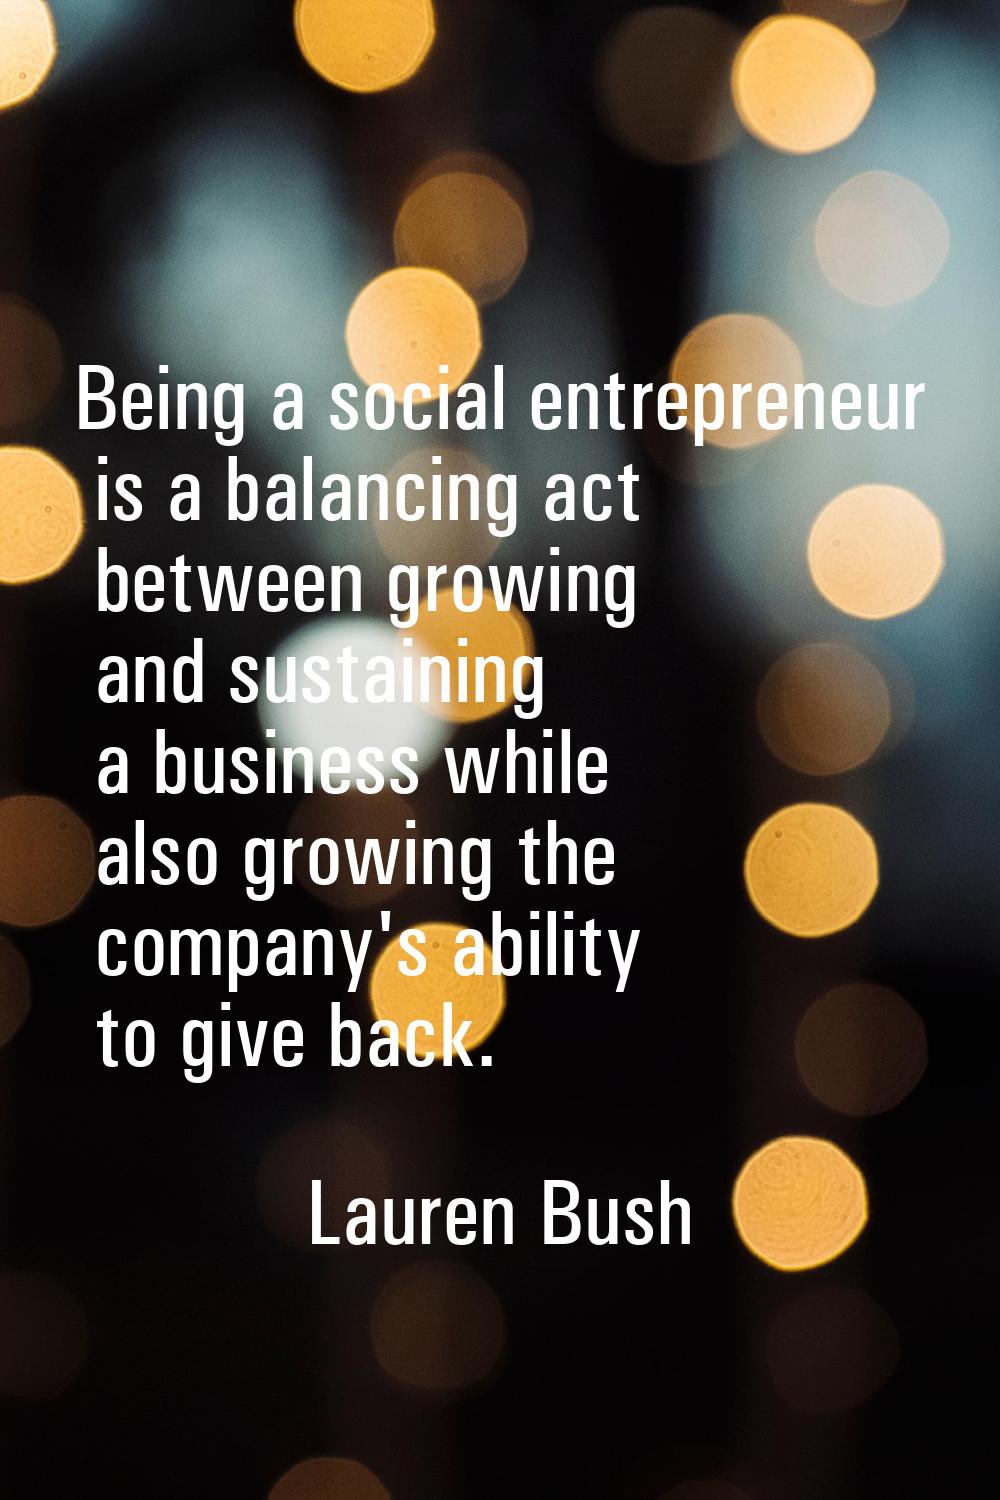 Being a social entrepreneur is a balancing act between growing and sustaining a business while also